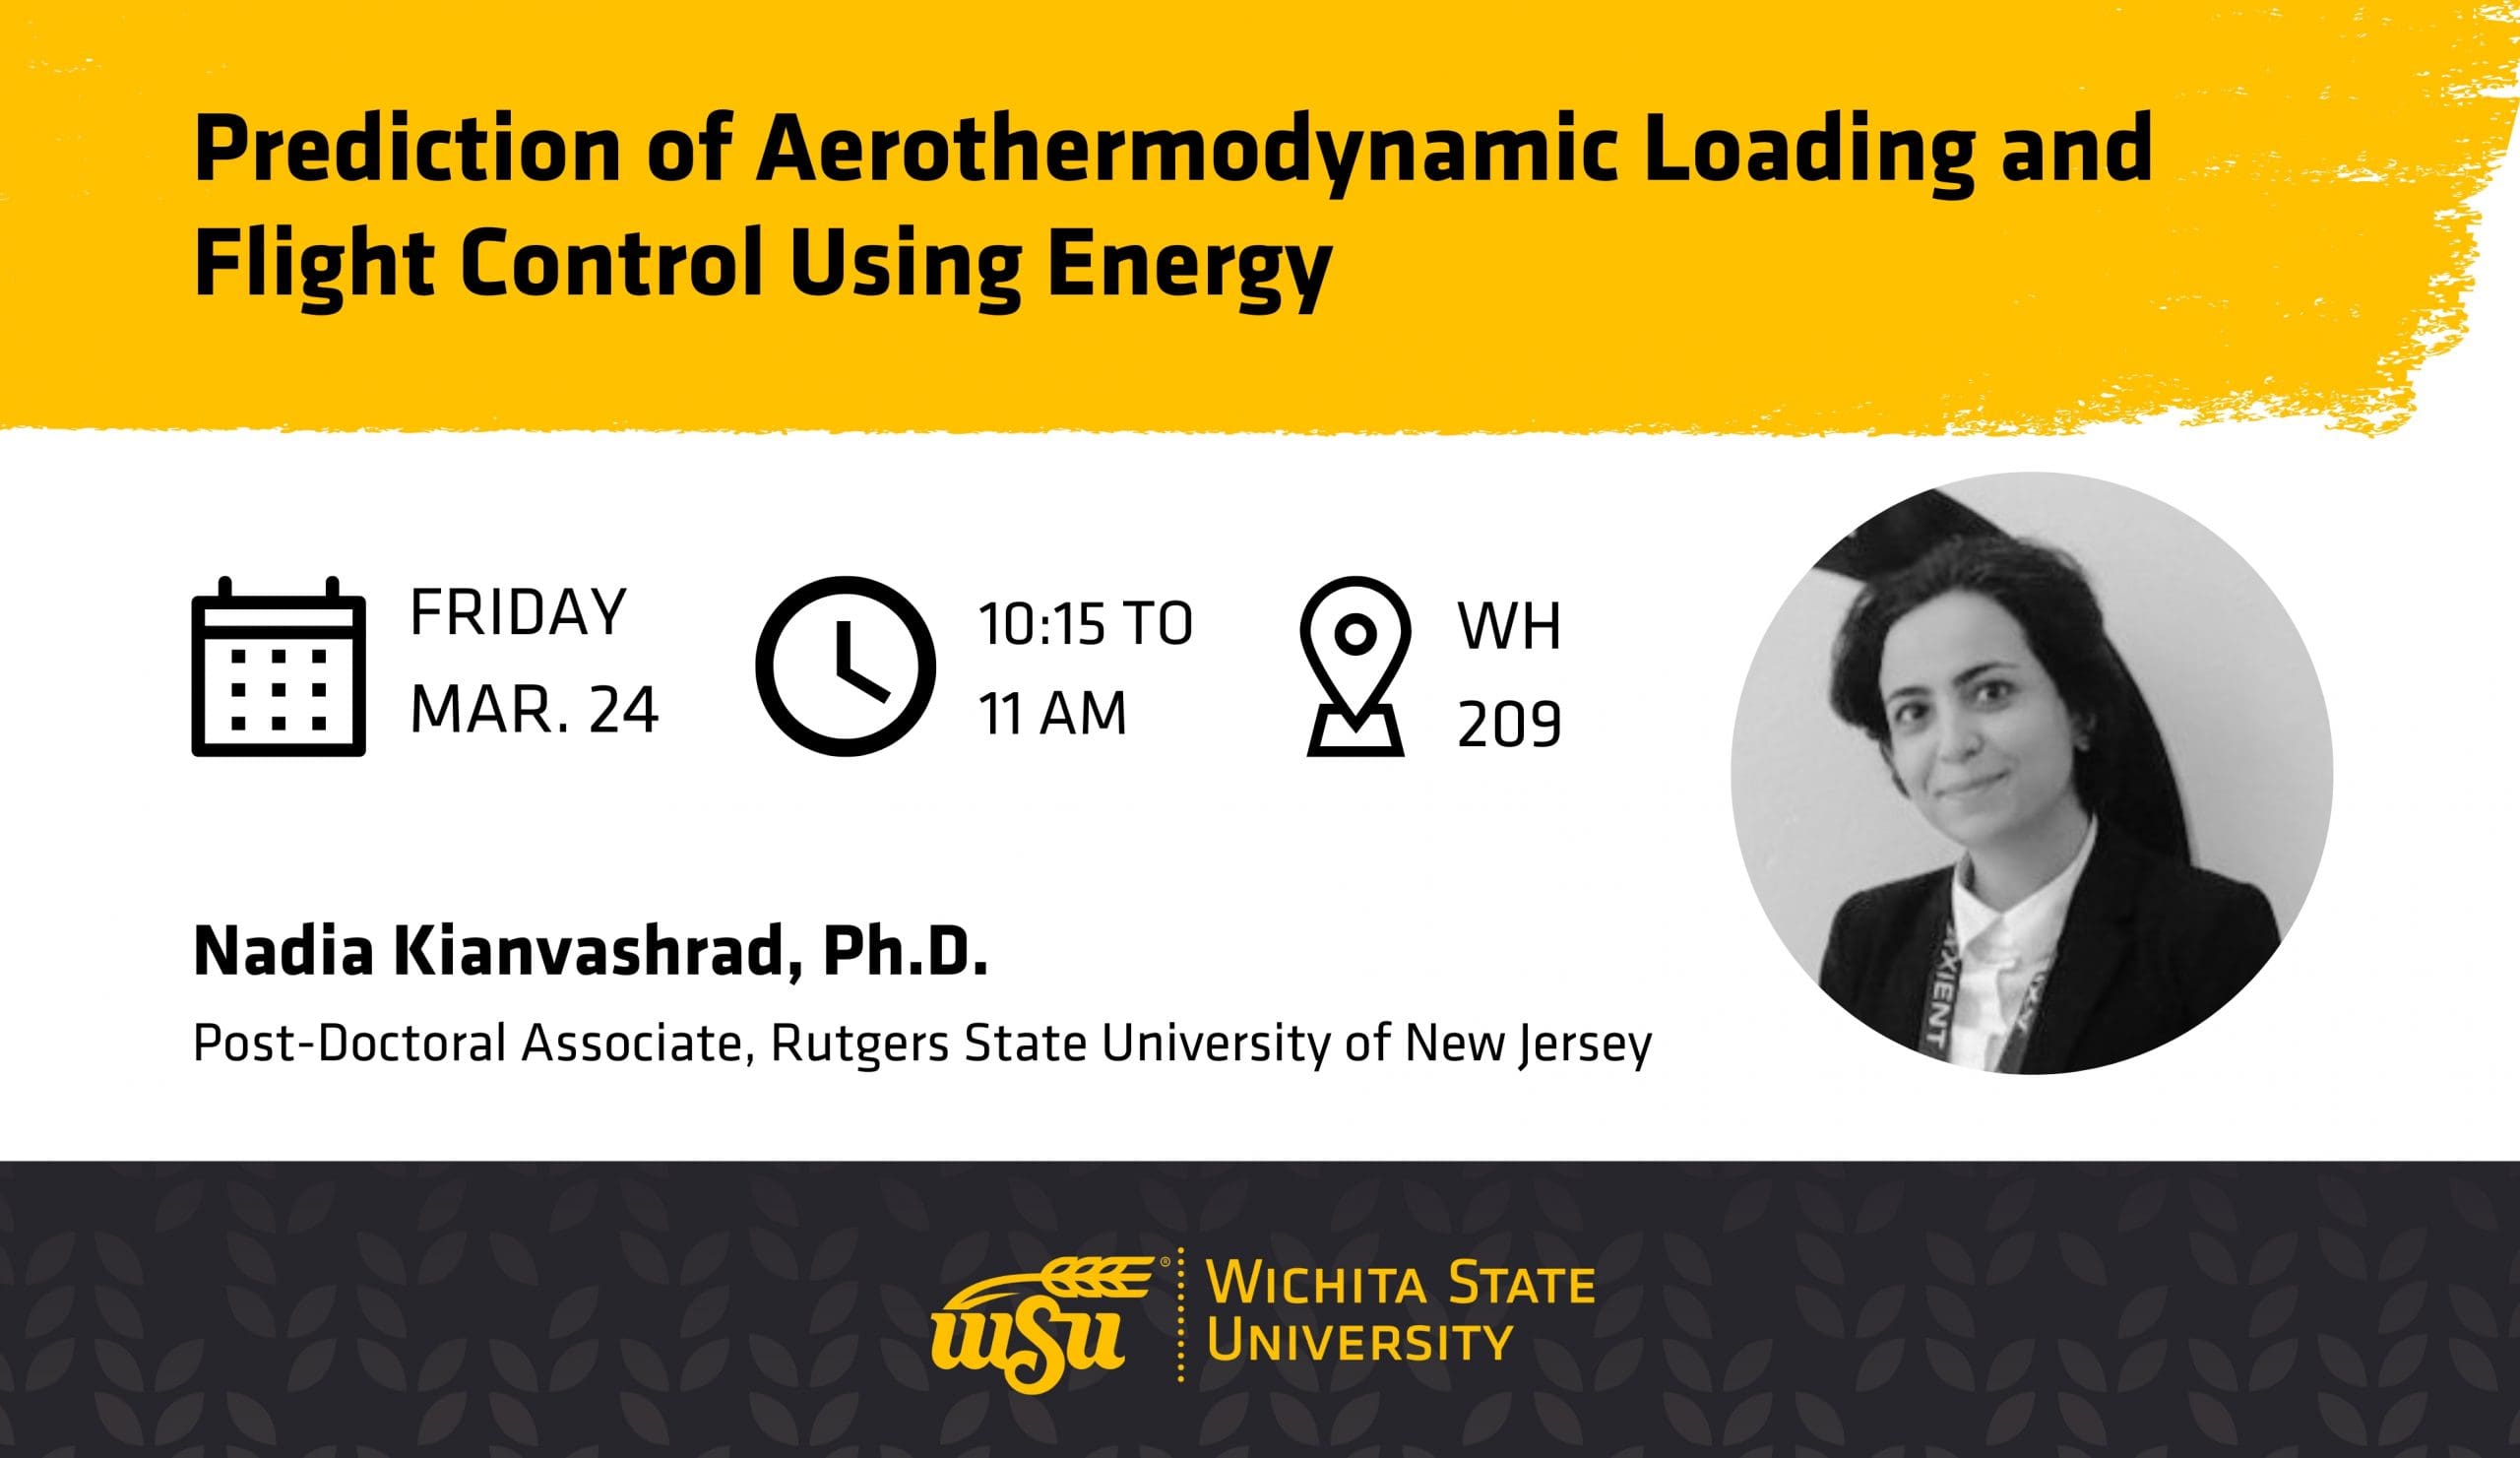 Graphic with a photo of Dr. Nadia Kianvashrad and the text, "Prediction of Aerothermodynamic Loading and Flight Control Using Energy | Friday, Mar. 24 | 10:15 to 11 AM | WH 209 | Nadia Kianvashrad, Ph.D., Post-Doctoral Associate, Rutgers State University of New Jersey" and the Wichita State logo.